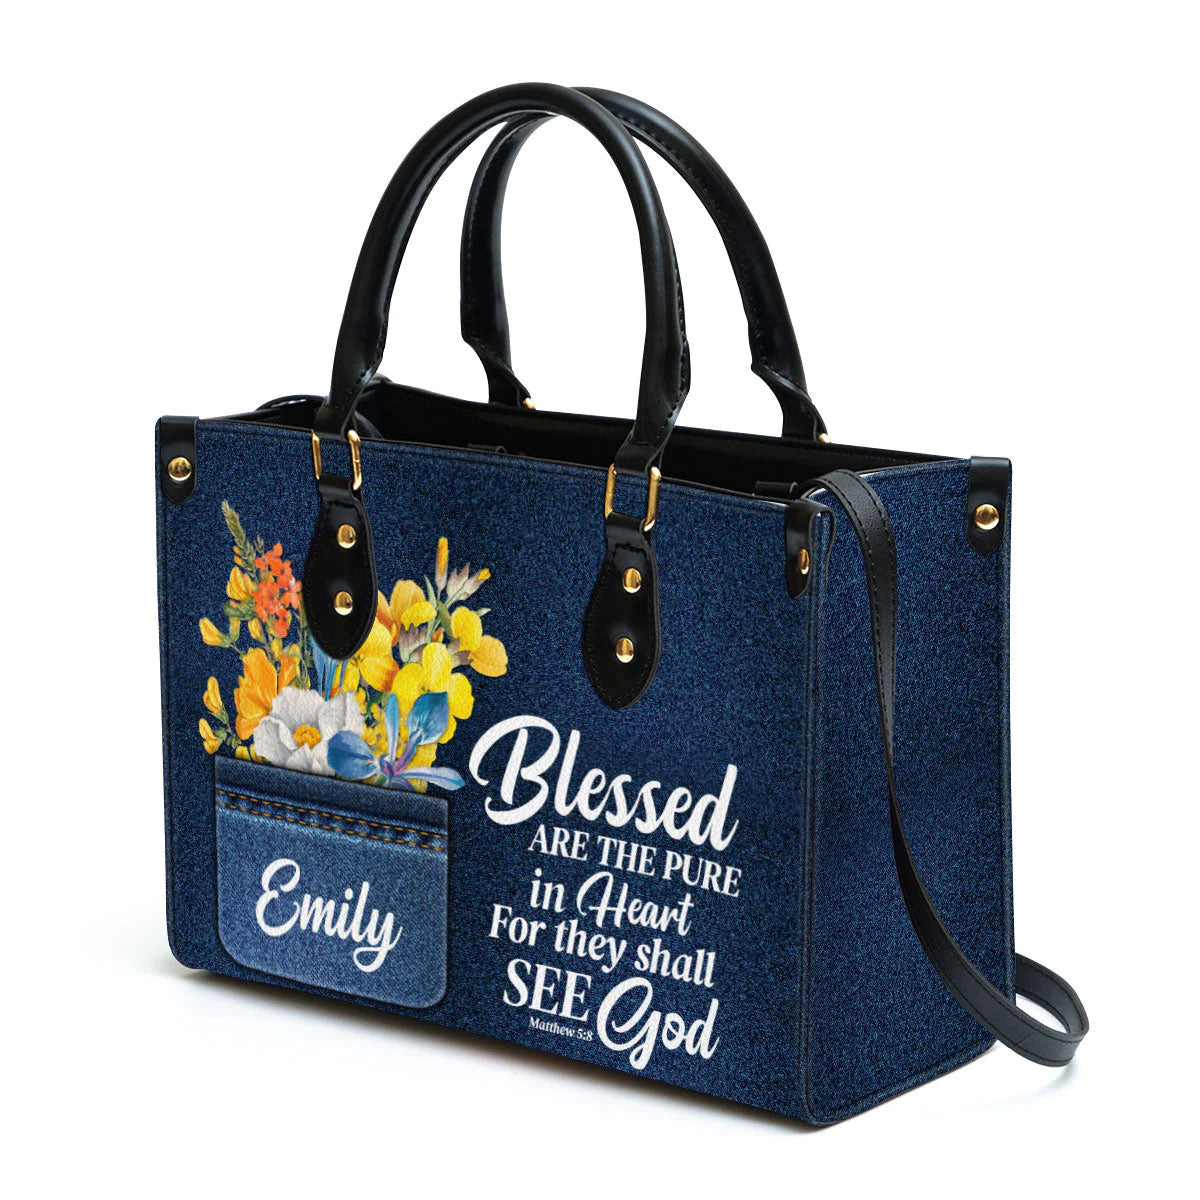 Christianart Handbag, This Is The Day That The Lord Has Made, Personalized Gifts, Gifts for Women, Christmas Gift. - Christian Art Bag